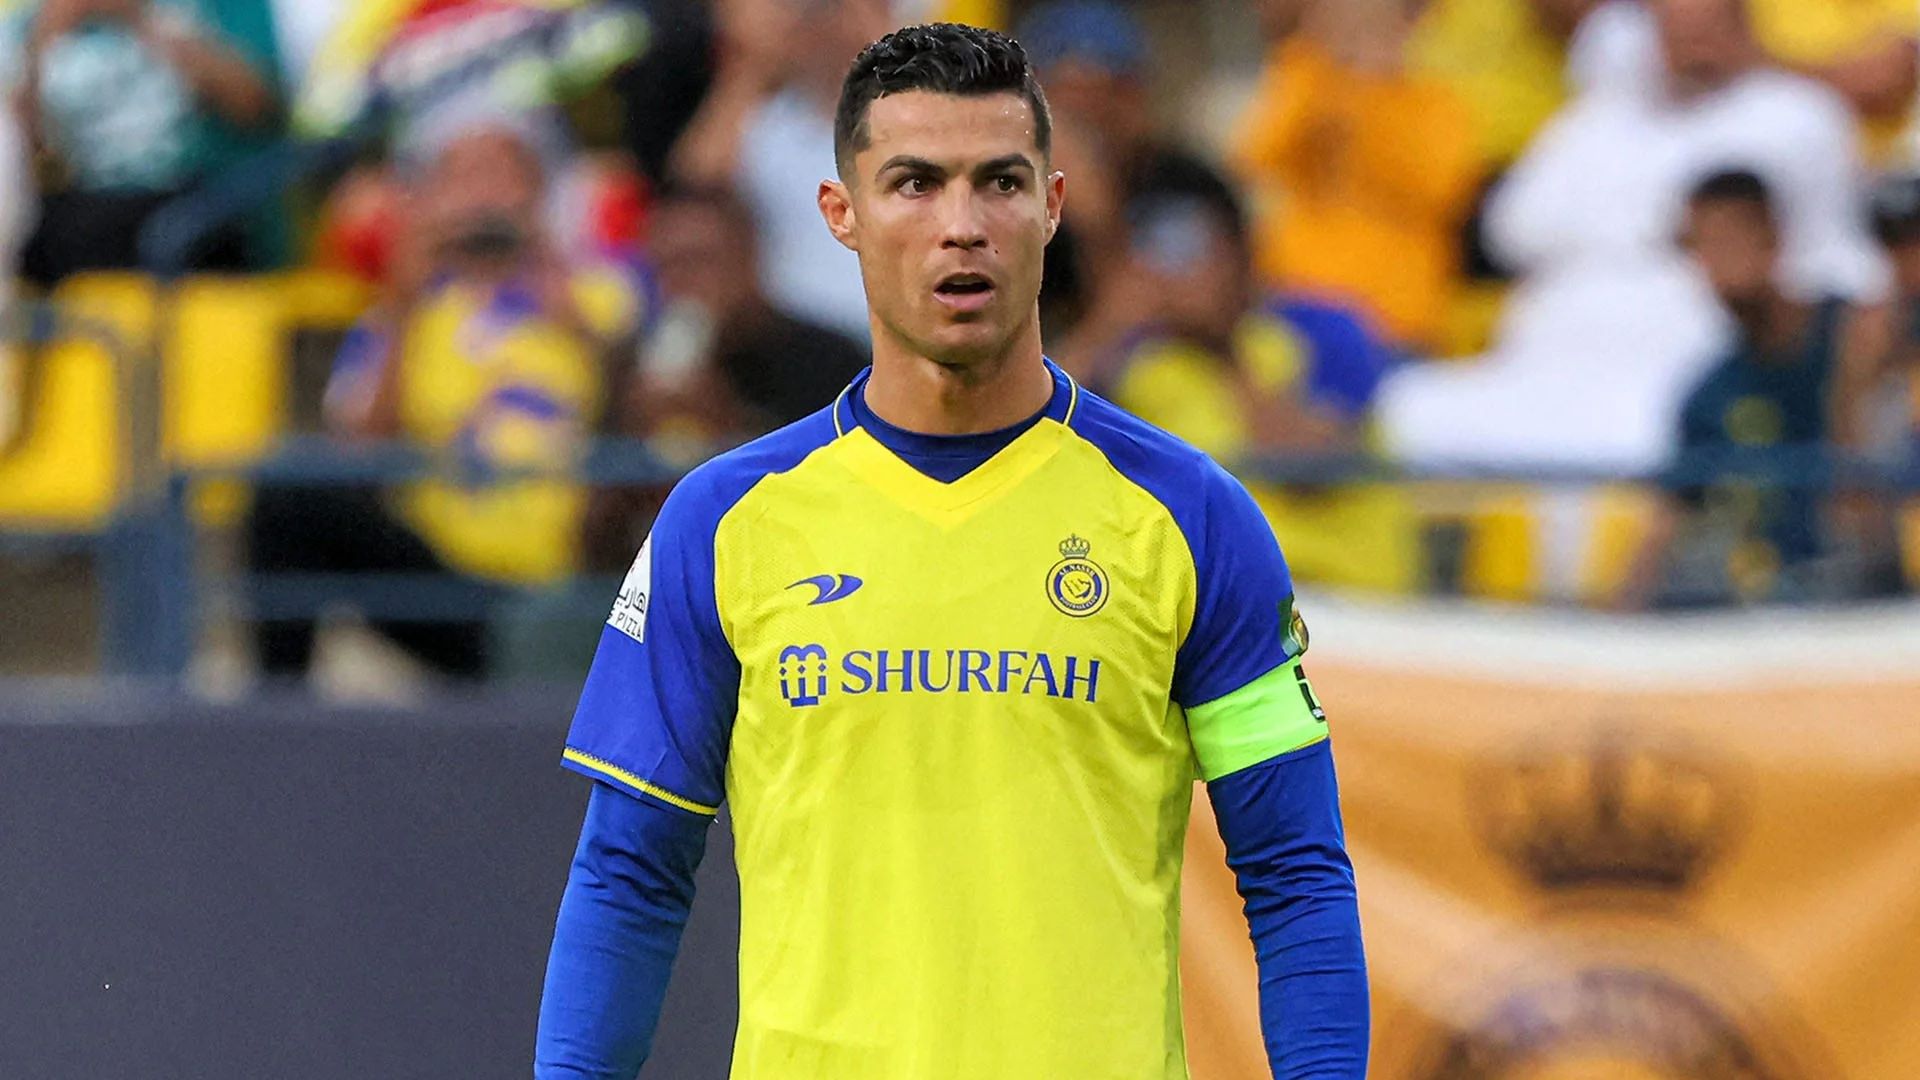 Cristiano Ronaldo Could Face Severe Punishment For Affectionate Gesture In Iran